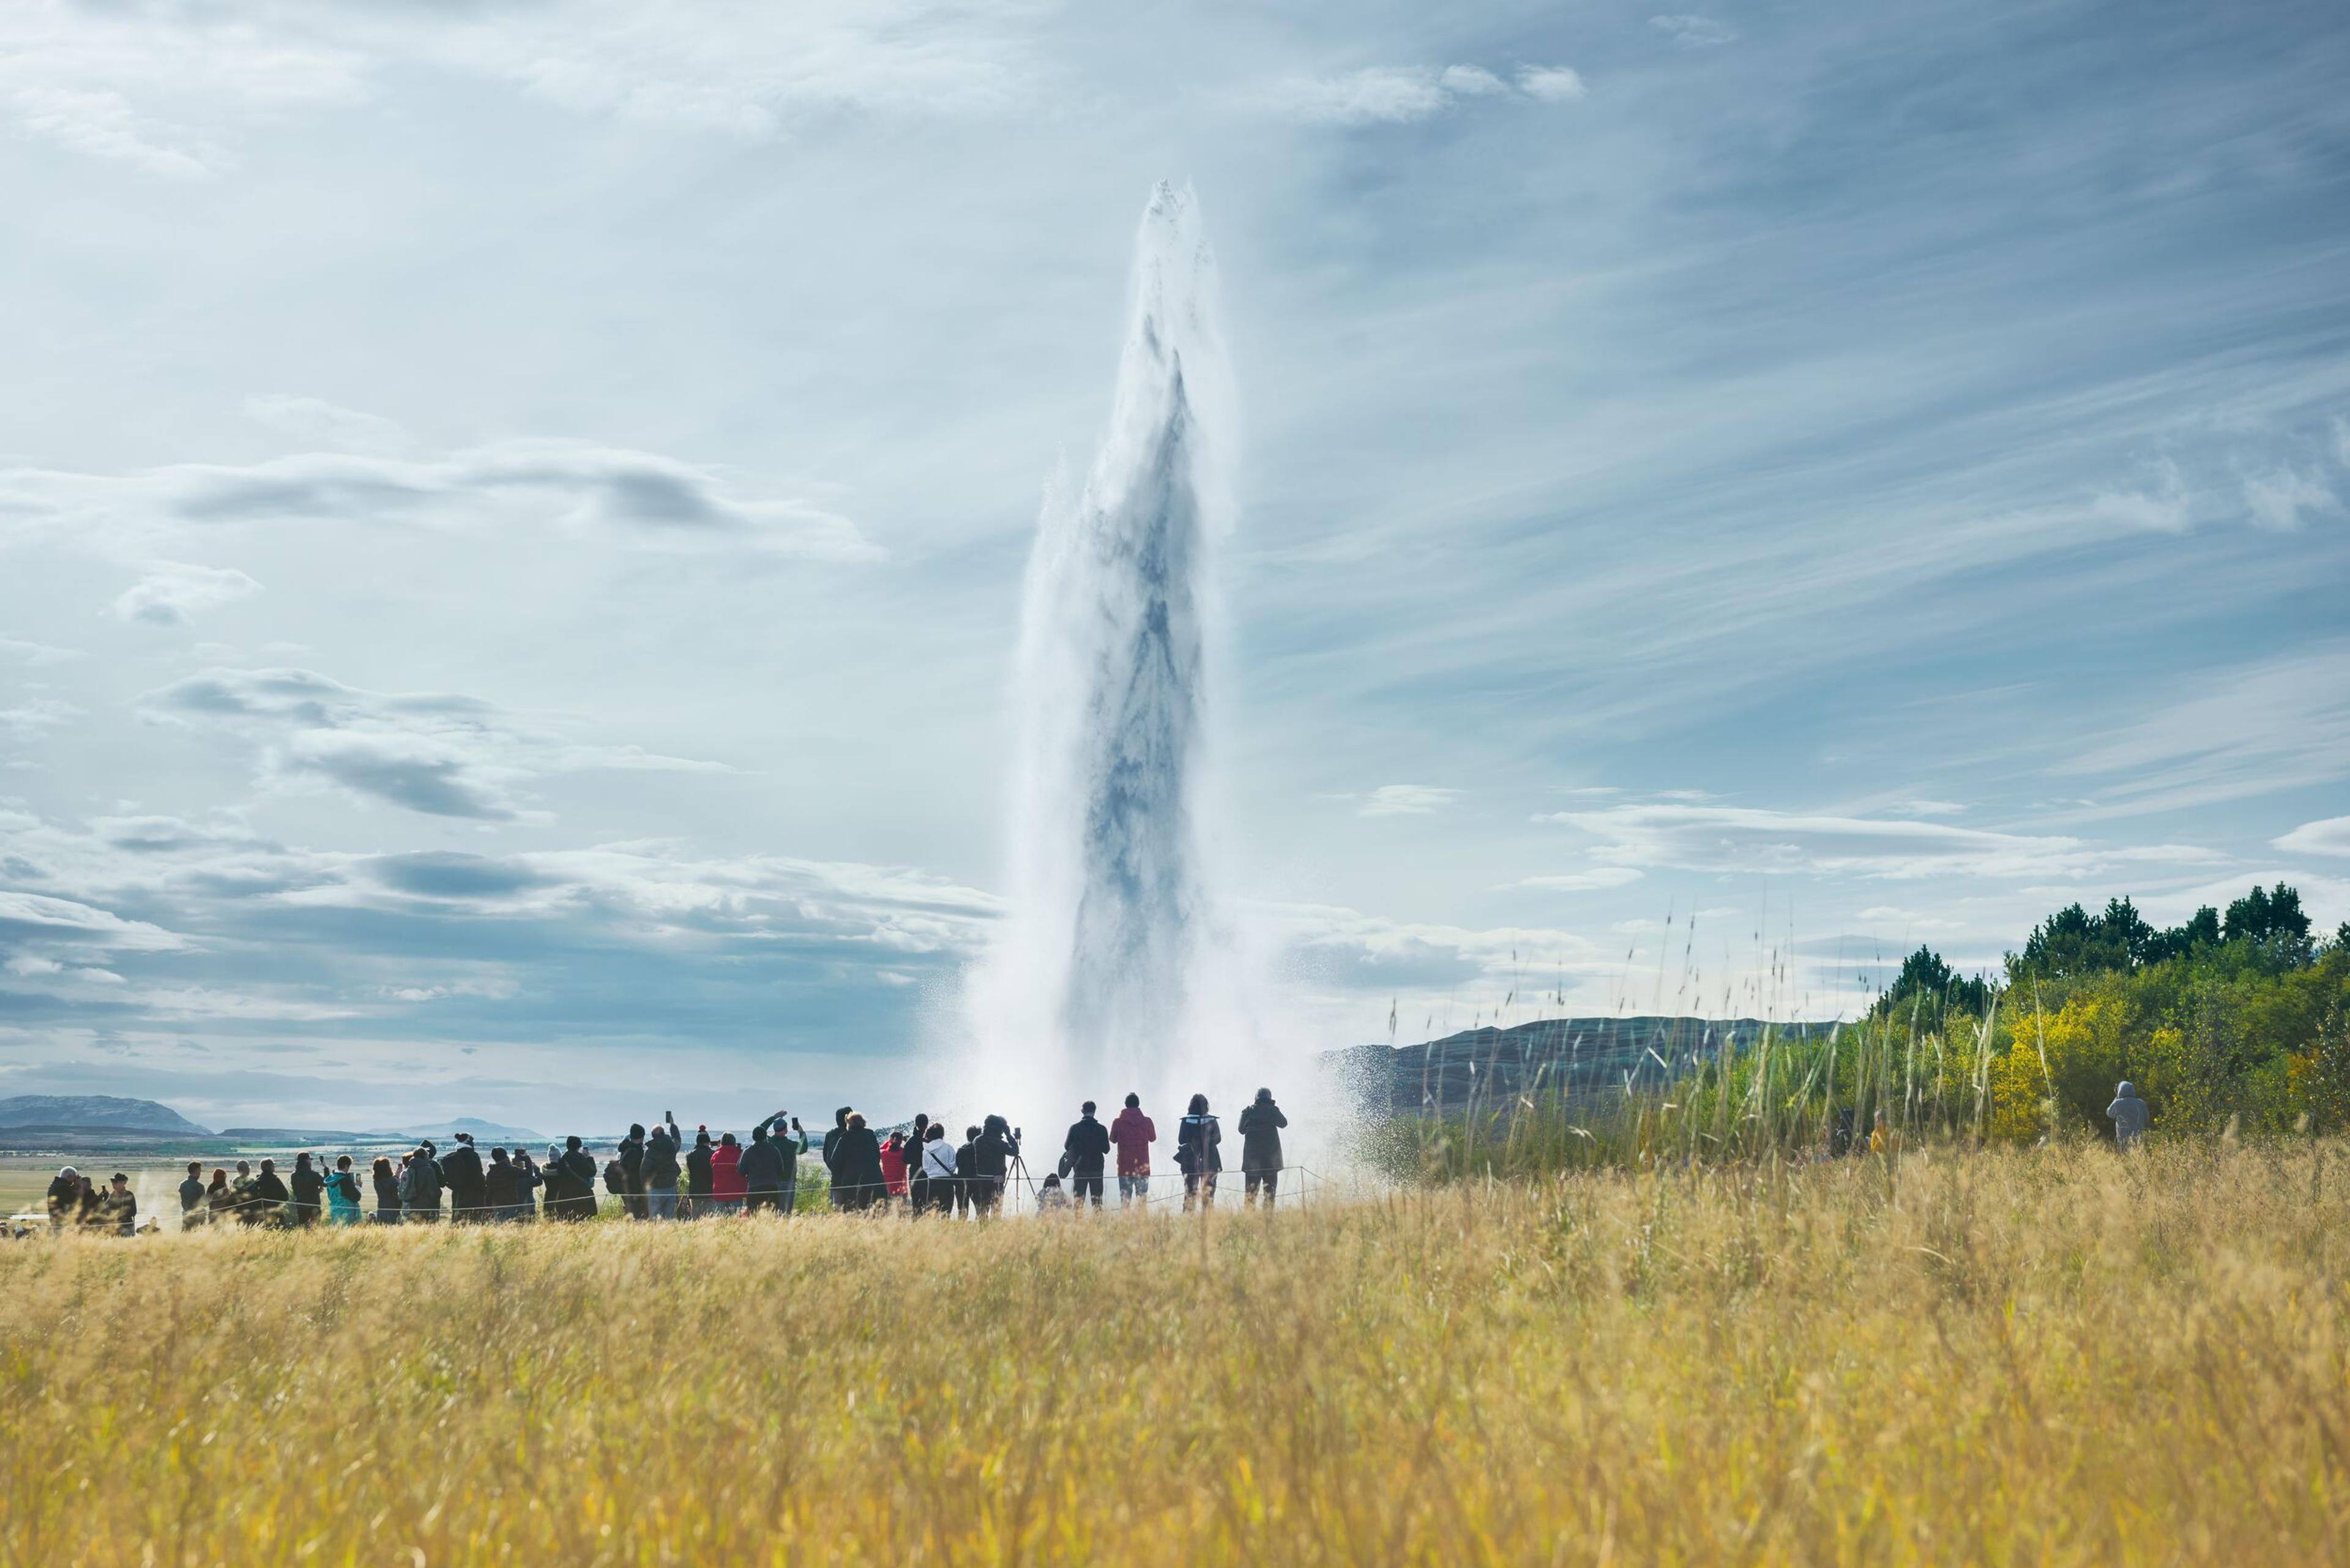 Tourists lined up at a safe distance to watch the powerful eruption of the geyser in the Golden Circle, Iceland. The sky is partly cloudy, casting a soft light on the scene, highlighting the geyser's spray against the sky